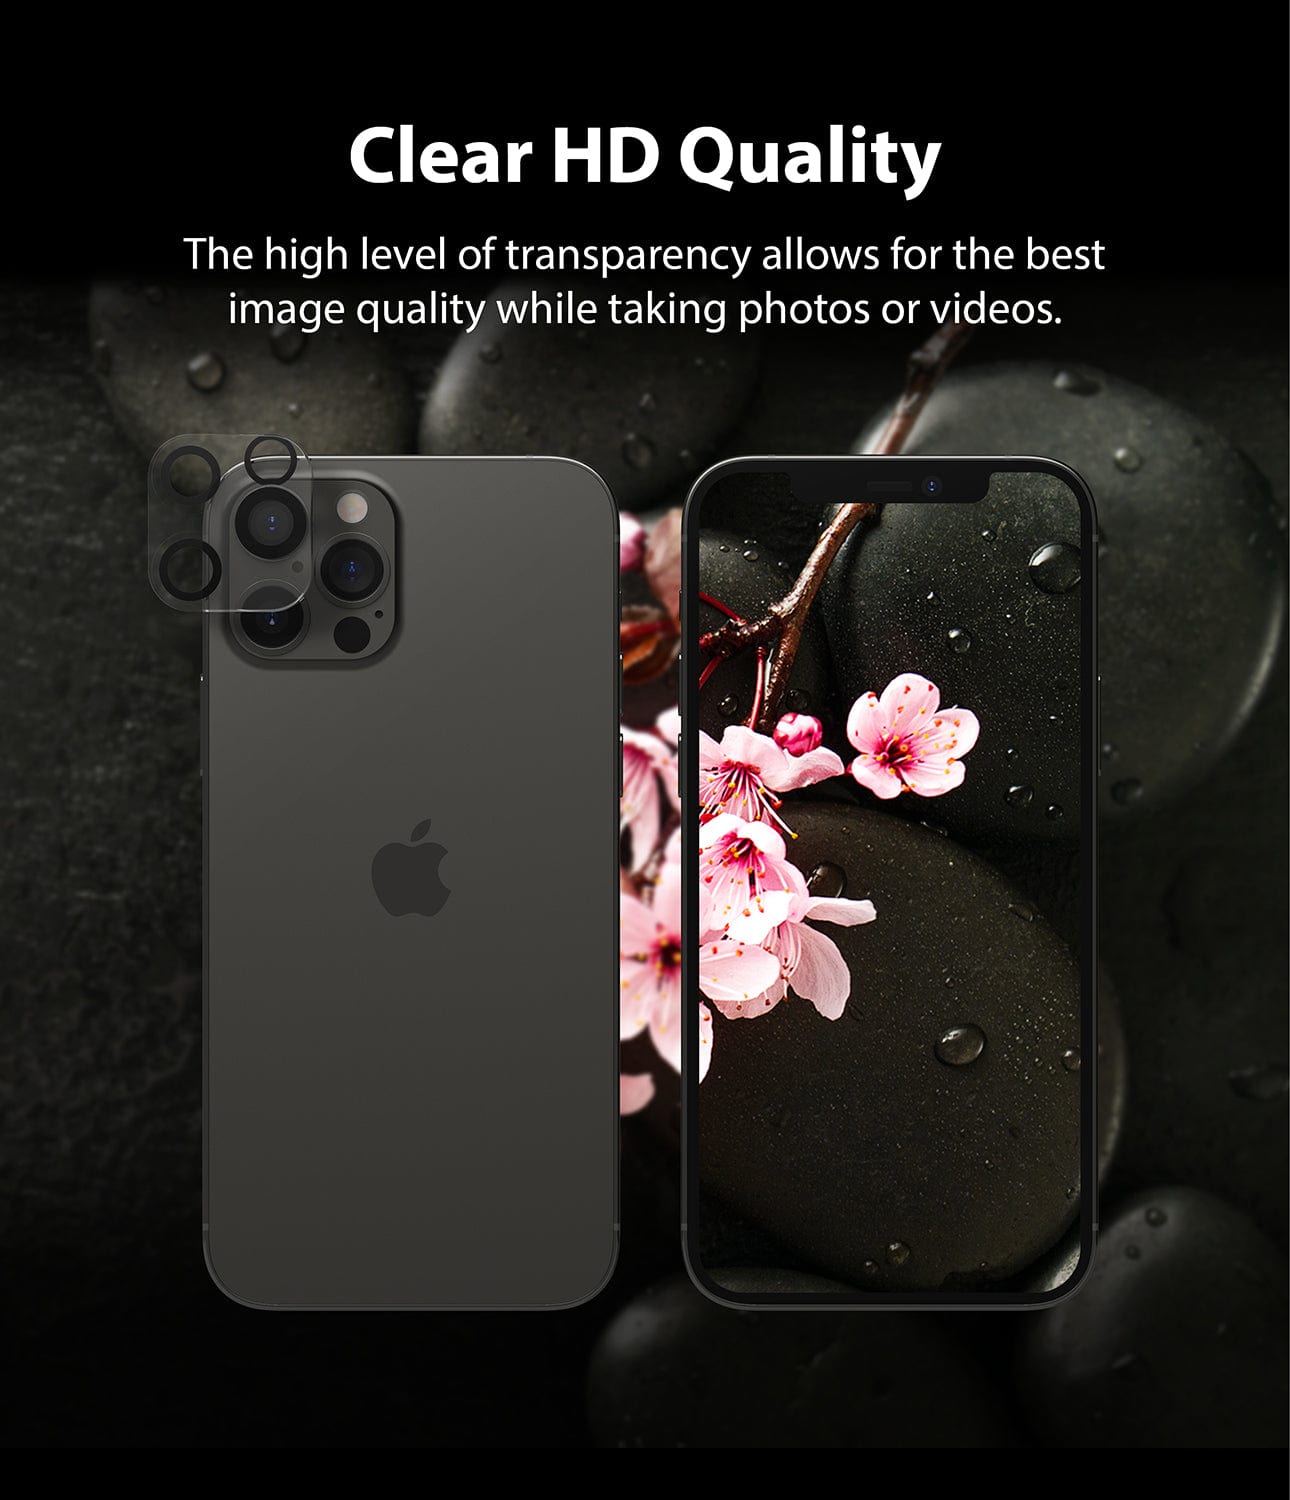 Glass Lens Cover Protector for iPhone 12 Pro Max